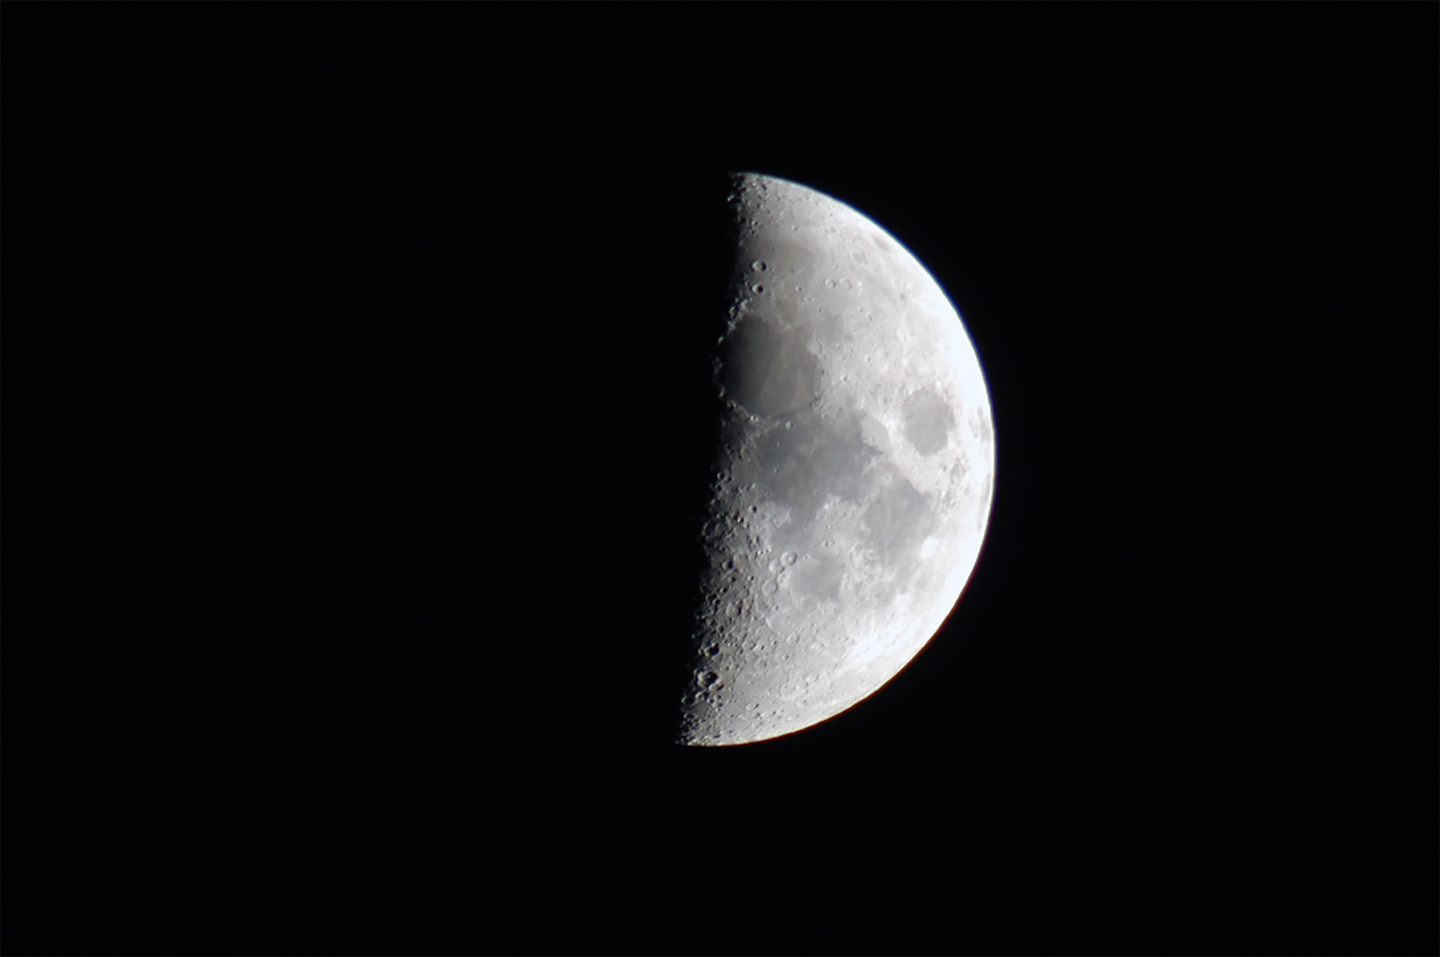 Image of a first quarter moon.